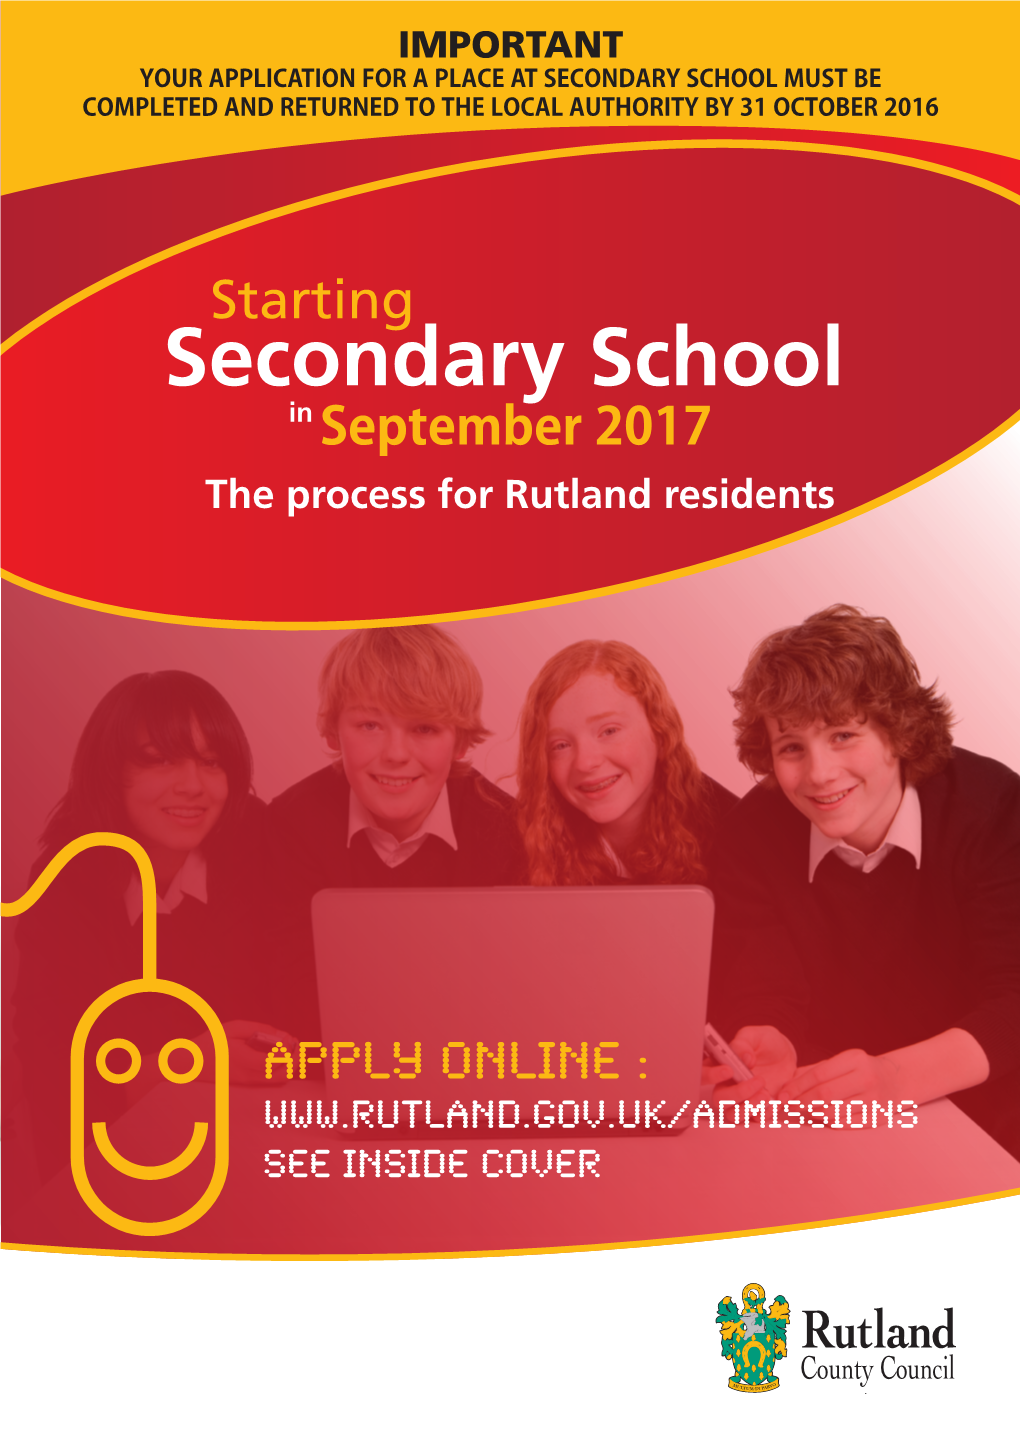 Secondary School Must Be Completed and Returned to the Local Authority by 31 October 2016